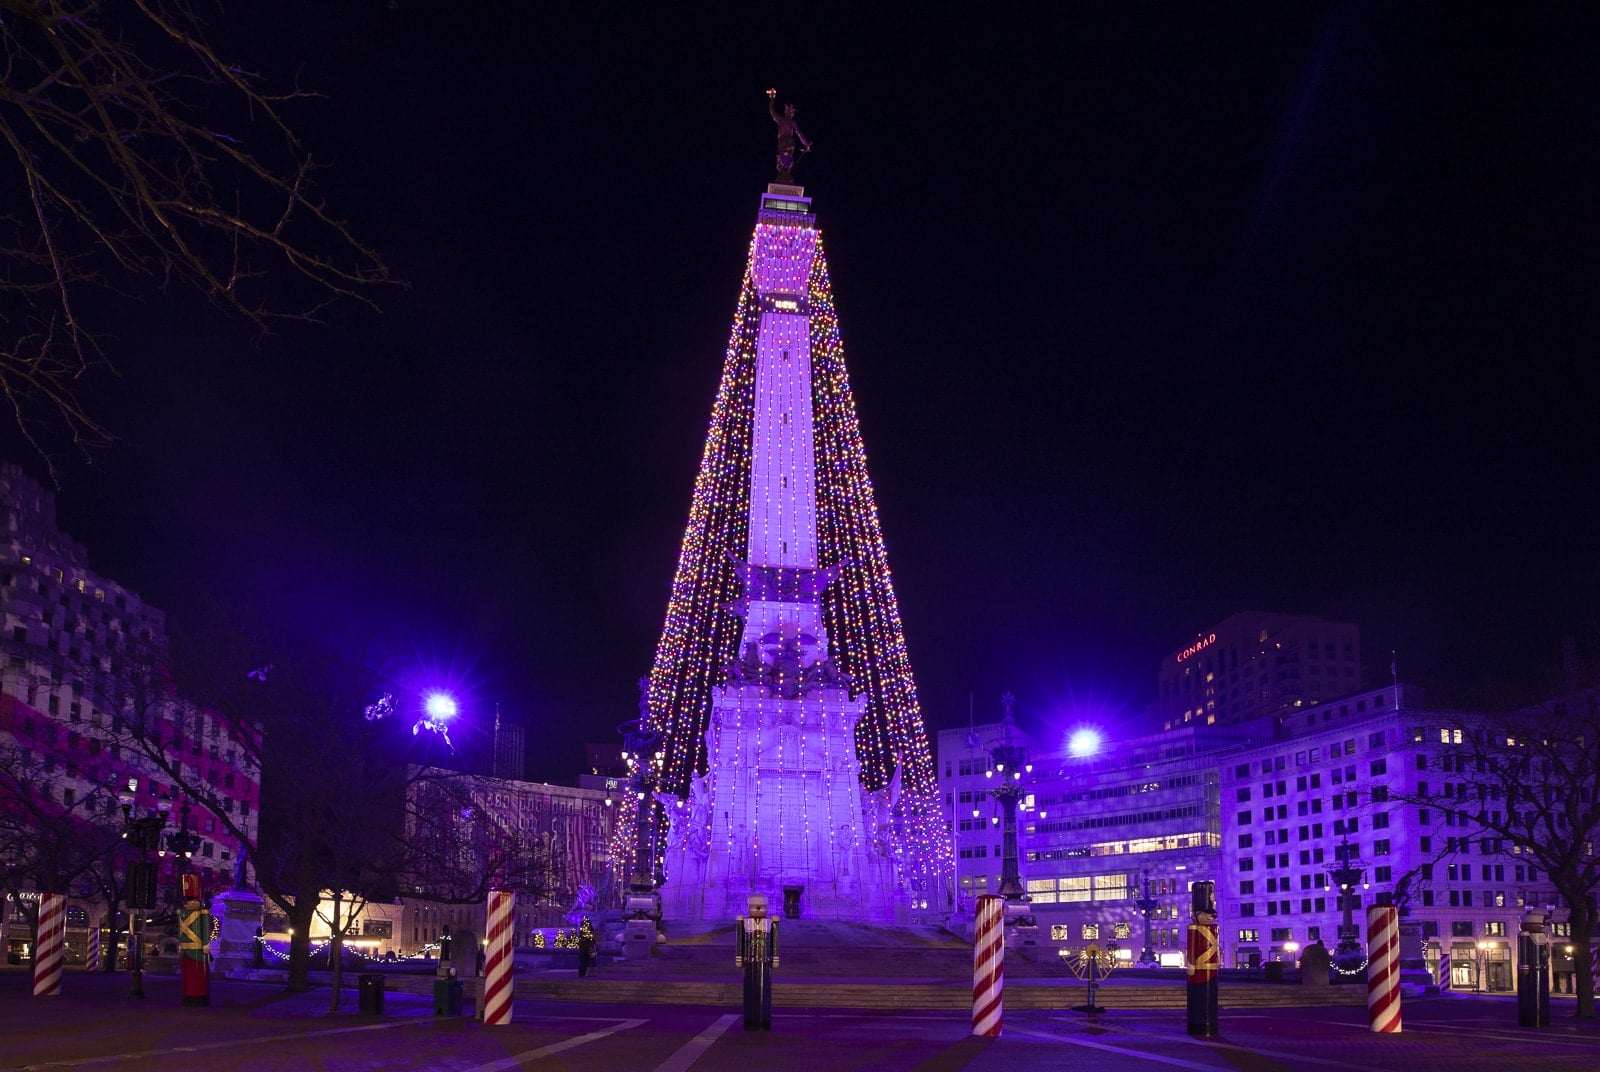 The World's Largest Christmas Tree in Indianapolis at Night with purple lights